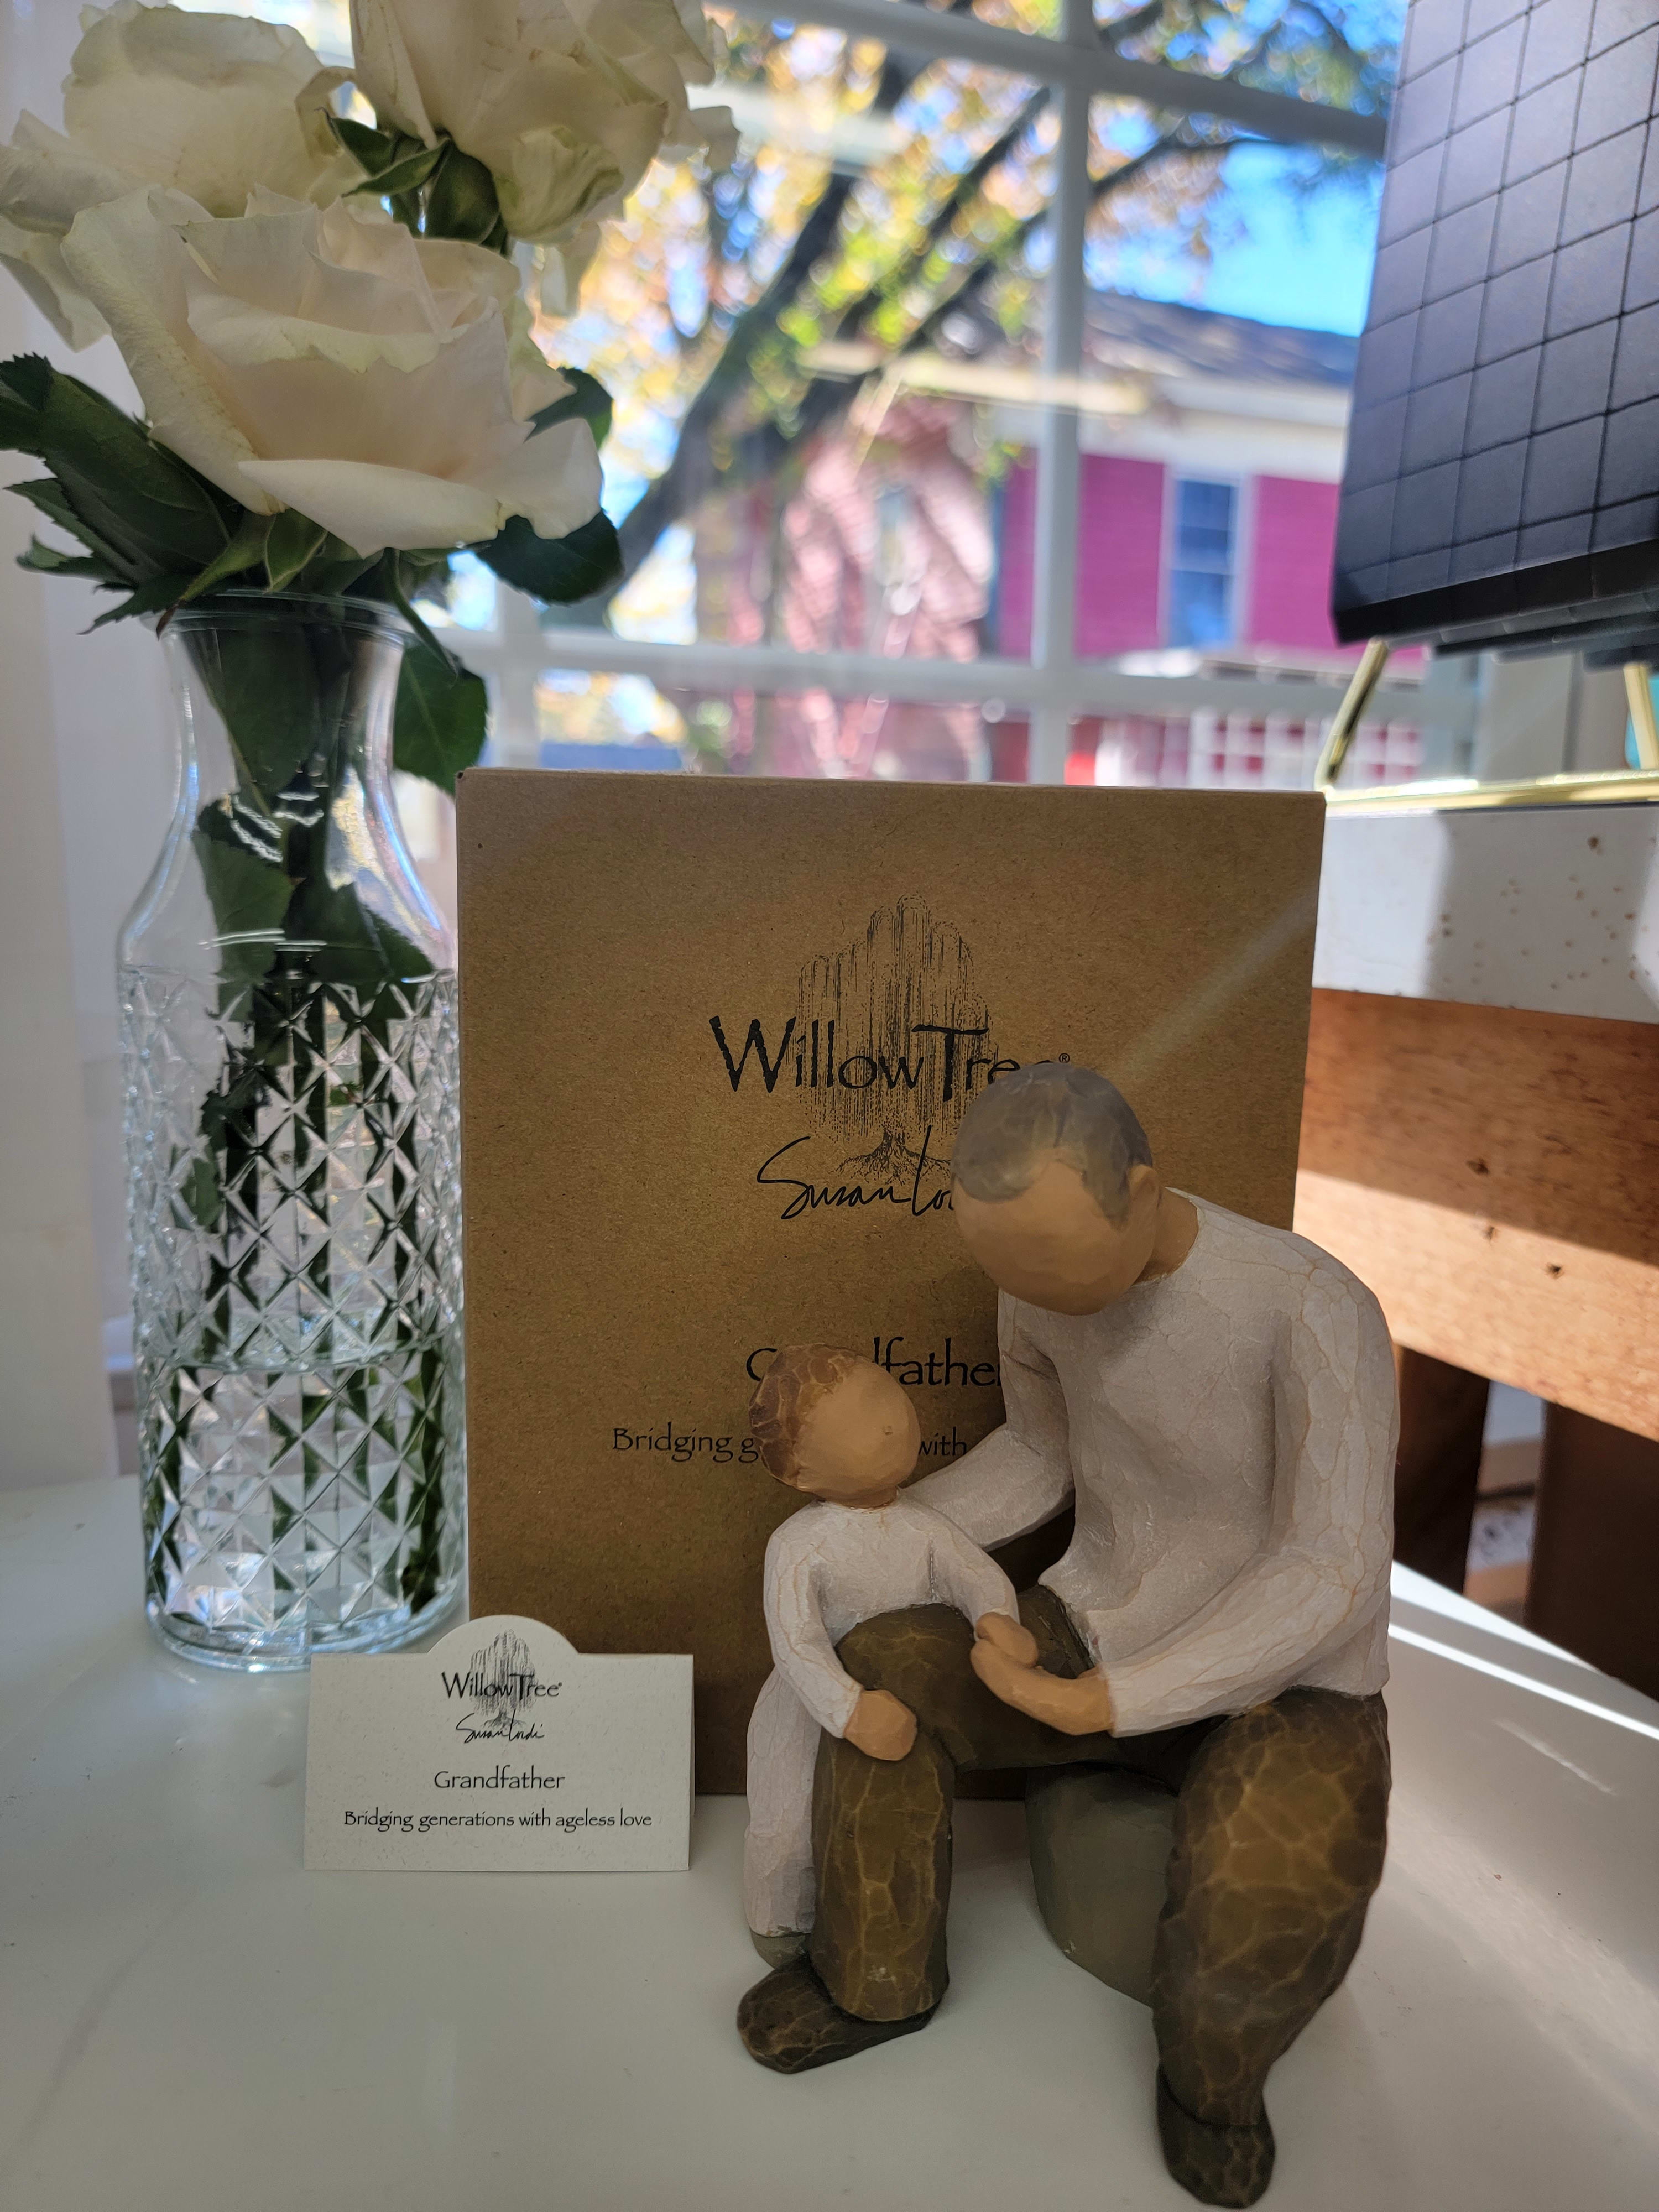 Willow Tree-Grandfather - Incredible gift for many occasions. Our Willow Tree collection can be sent to a home, business or funeral service. &quot;Grandfather&quot; ..Bridging generations with ageless love.